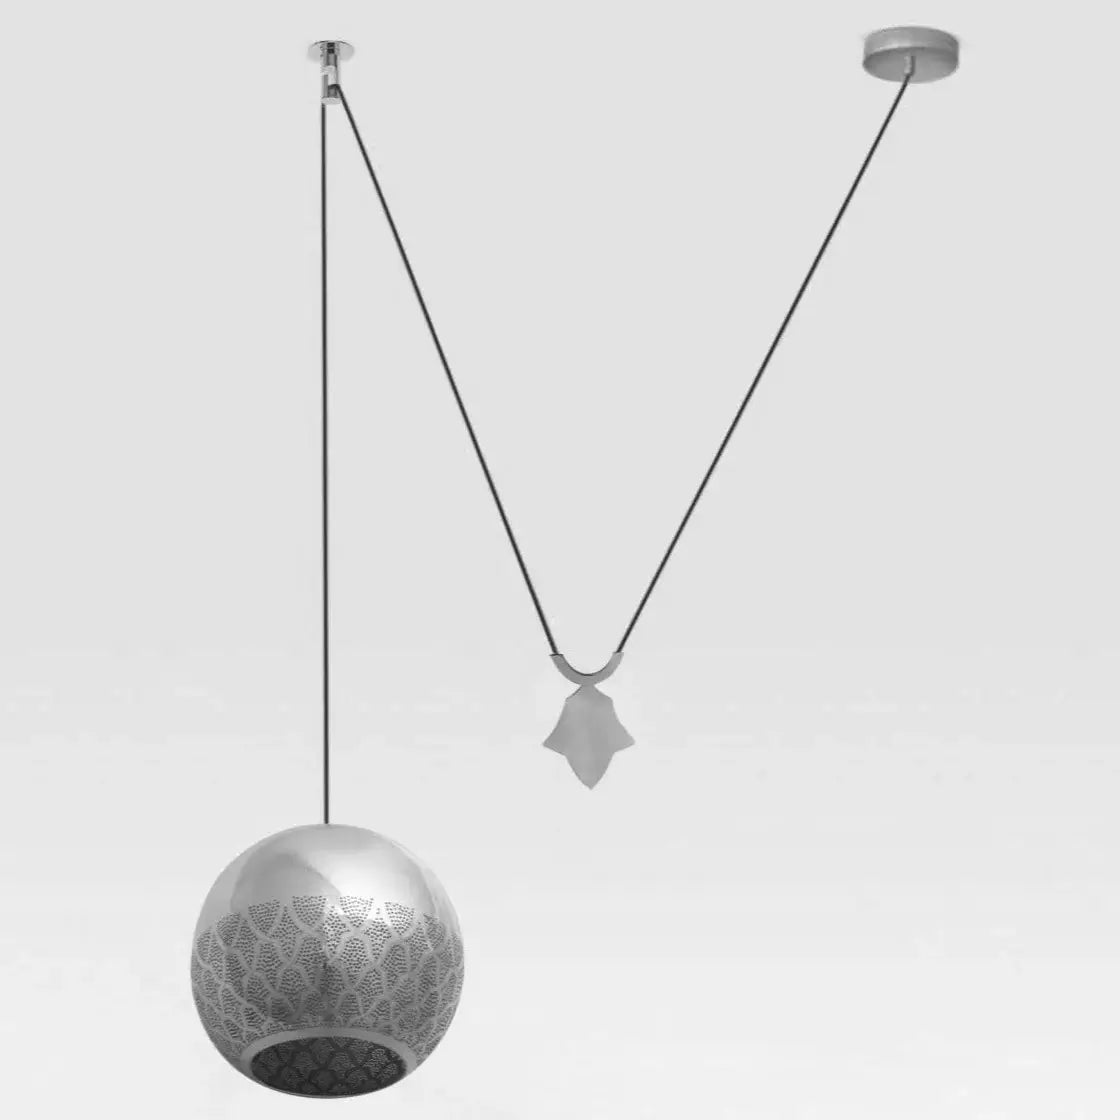 Dounia home Pendant light in nickel silver   made of Metal, Model: Nur reversed counterbalance